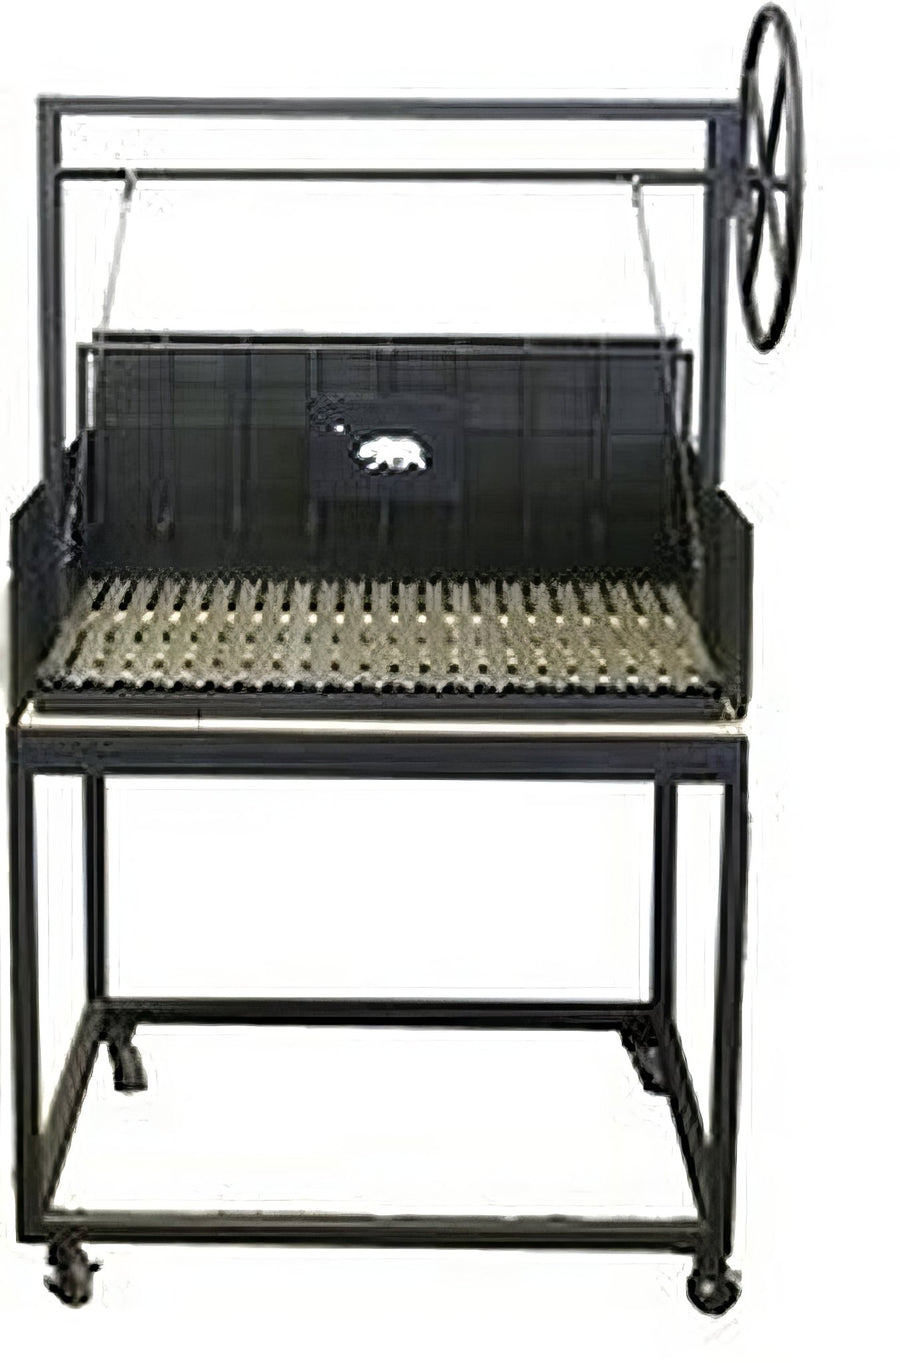 Portable Argentine Grill with Rear Brasero - Heritage Backyard Inc.